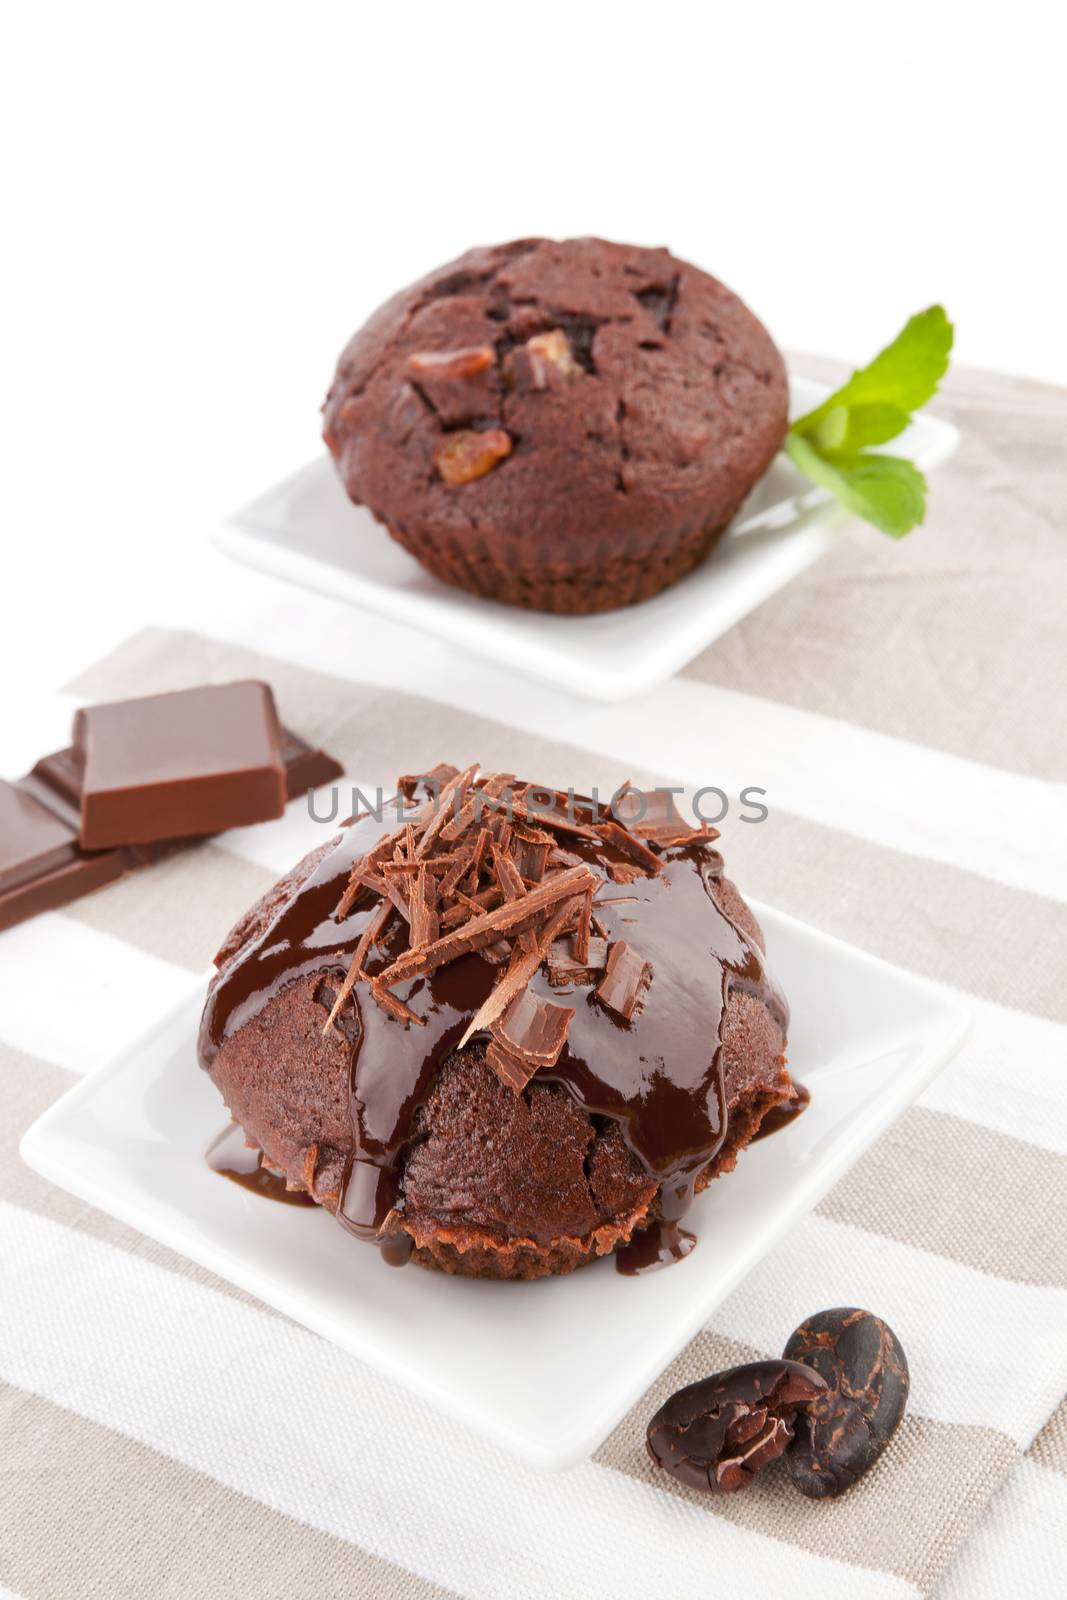 Delicious chocolate muffin with chocolate crop, fresh mint leaf and chocolate. Chocolate background.